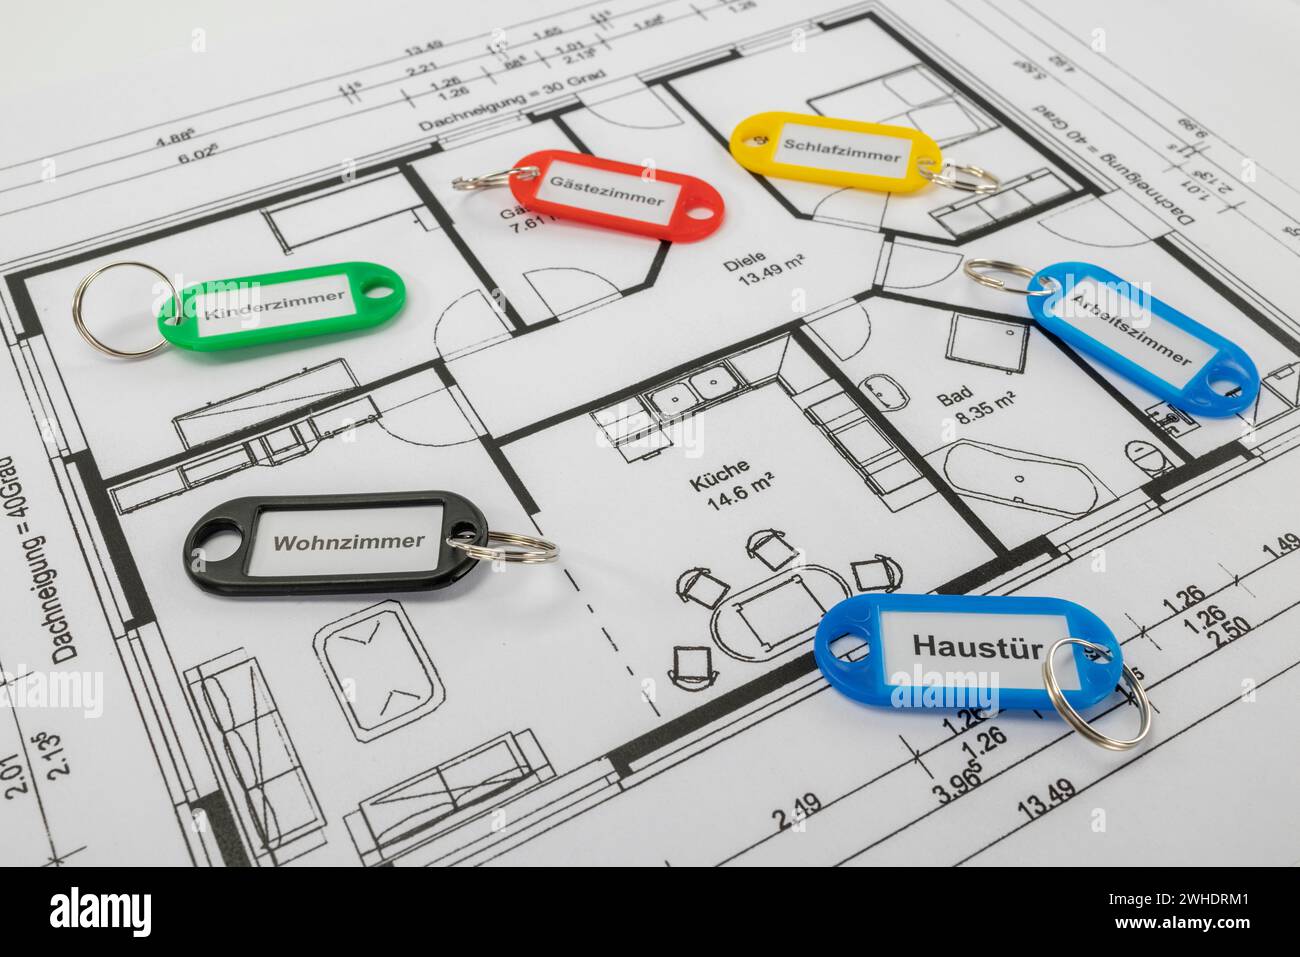 Floor plan, different colored key rings, labeled, layout, rooms, Stock Photo